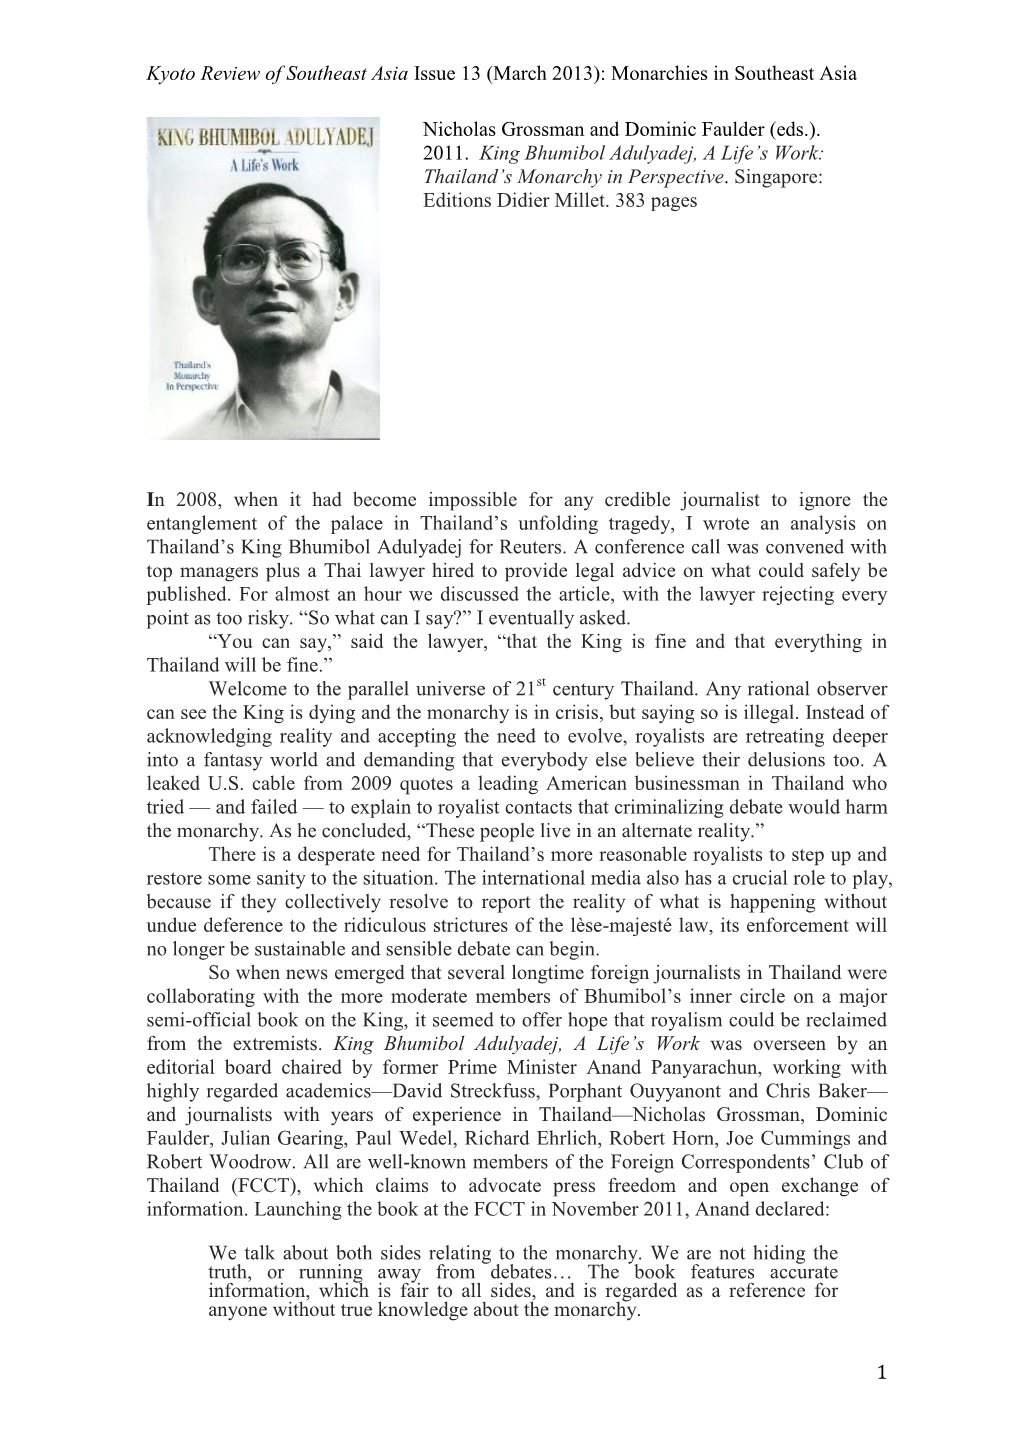 Kyoto Review of Southeast Asia Issue 13 (March 2013): Monarchies in Southeast Asia